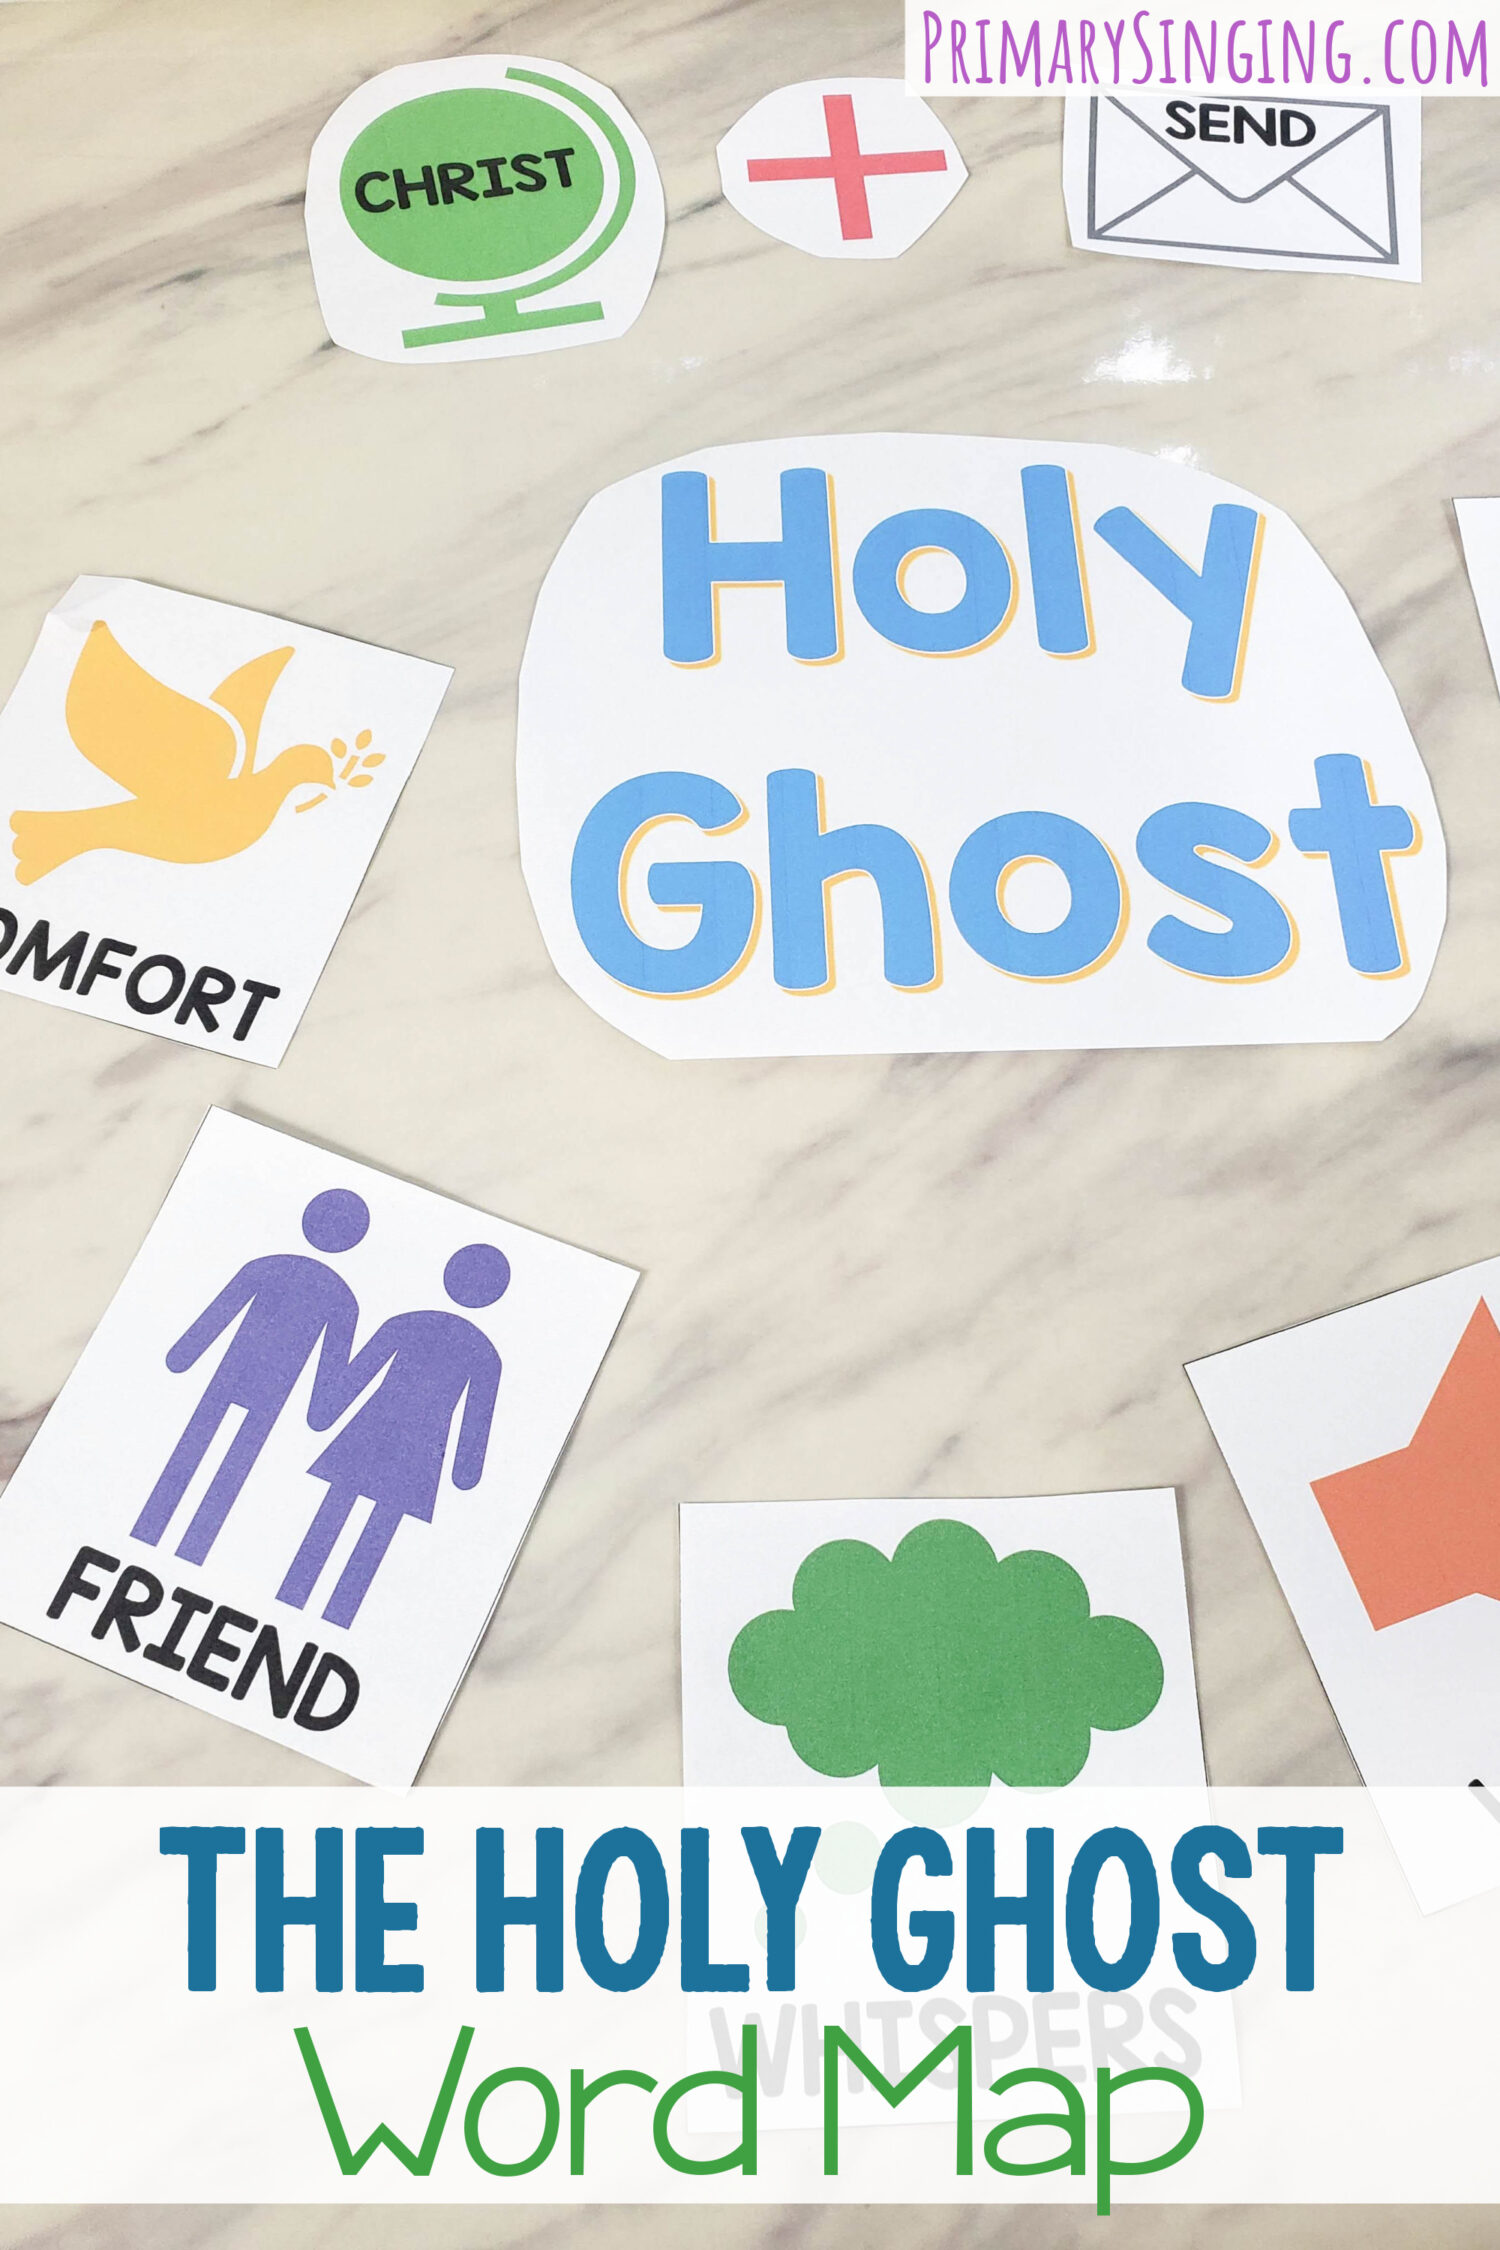 The Holy Ghost Word Map singing time idea - fun and engaging way to teach this song the first time line by line using a visual representation of the lyrics that teach the core message of this song. Includes printable song helps for LDS Primary music leaders.